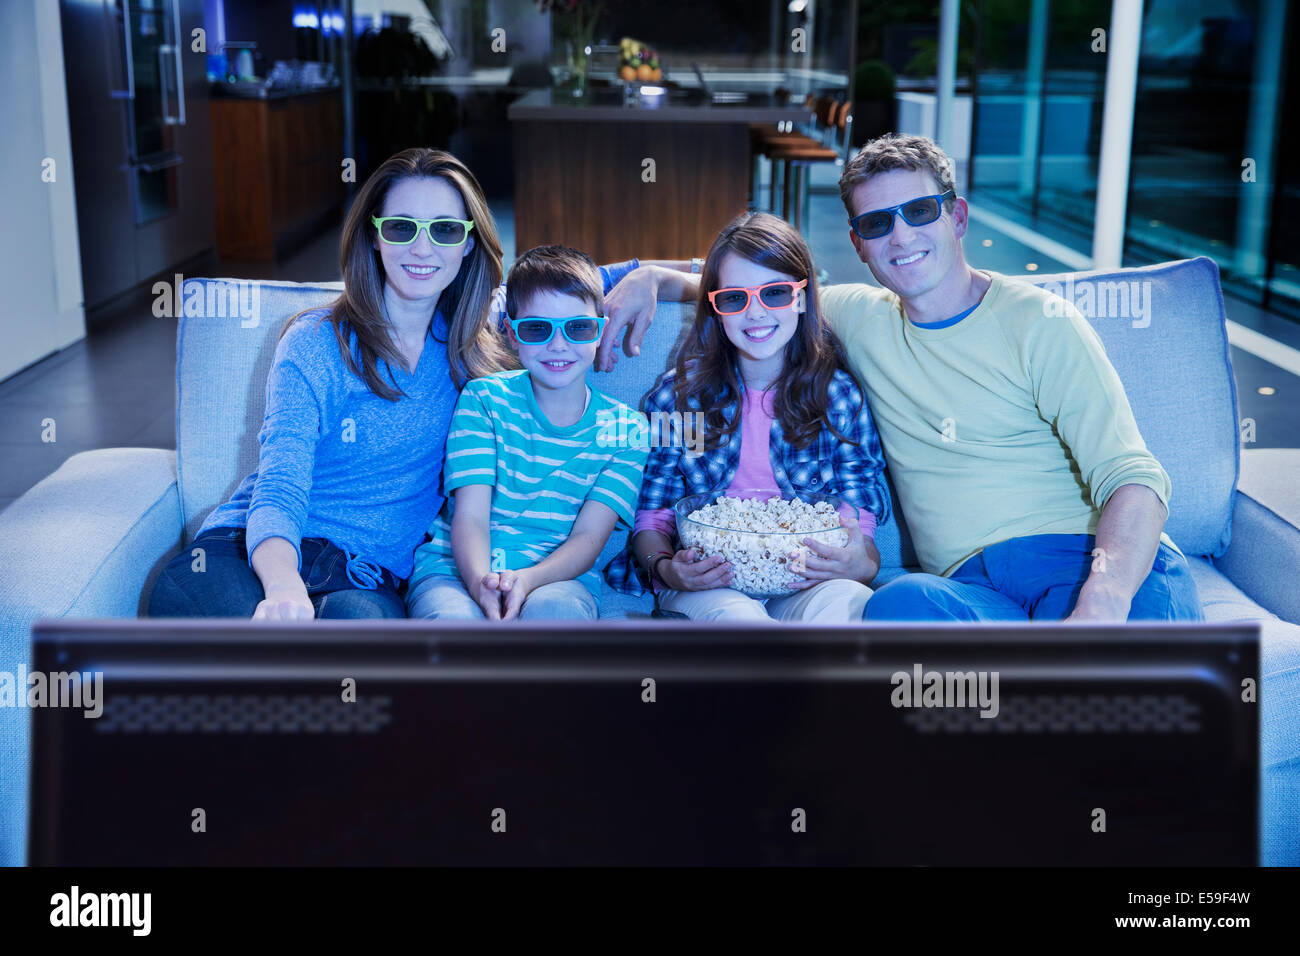 Family watching 3D television in living room Stock Photo